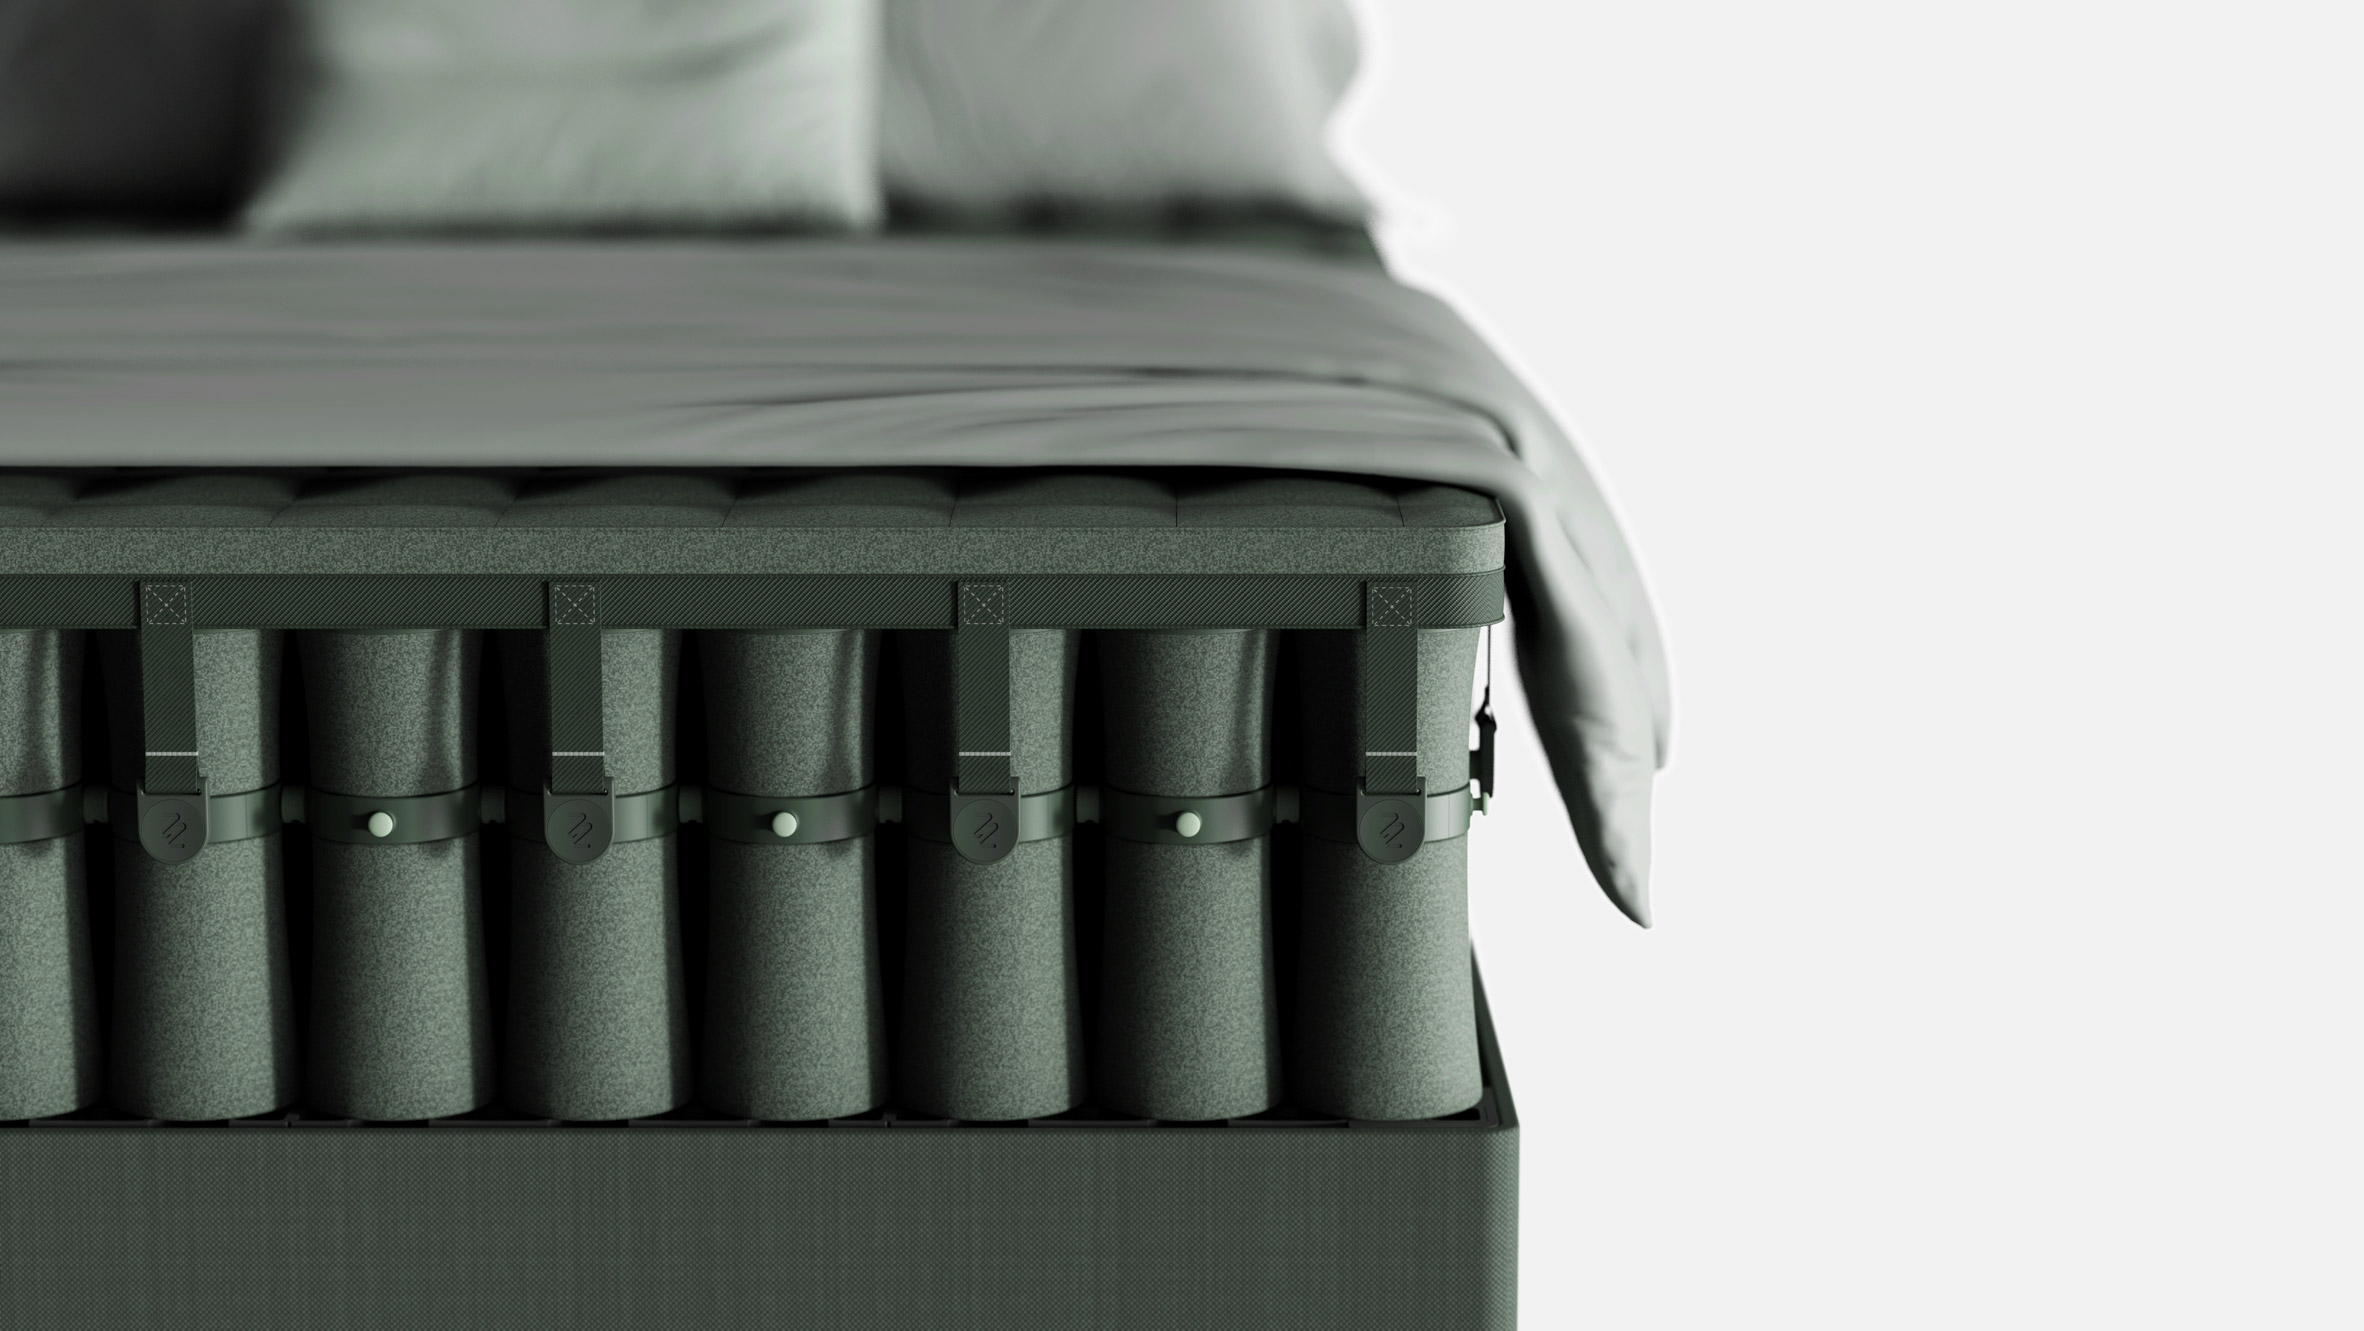 Photo of the Mazzu Open mattress showing individual polyester-covered springs by design studio Layer